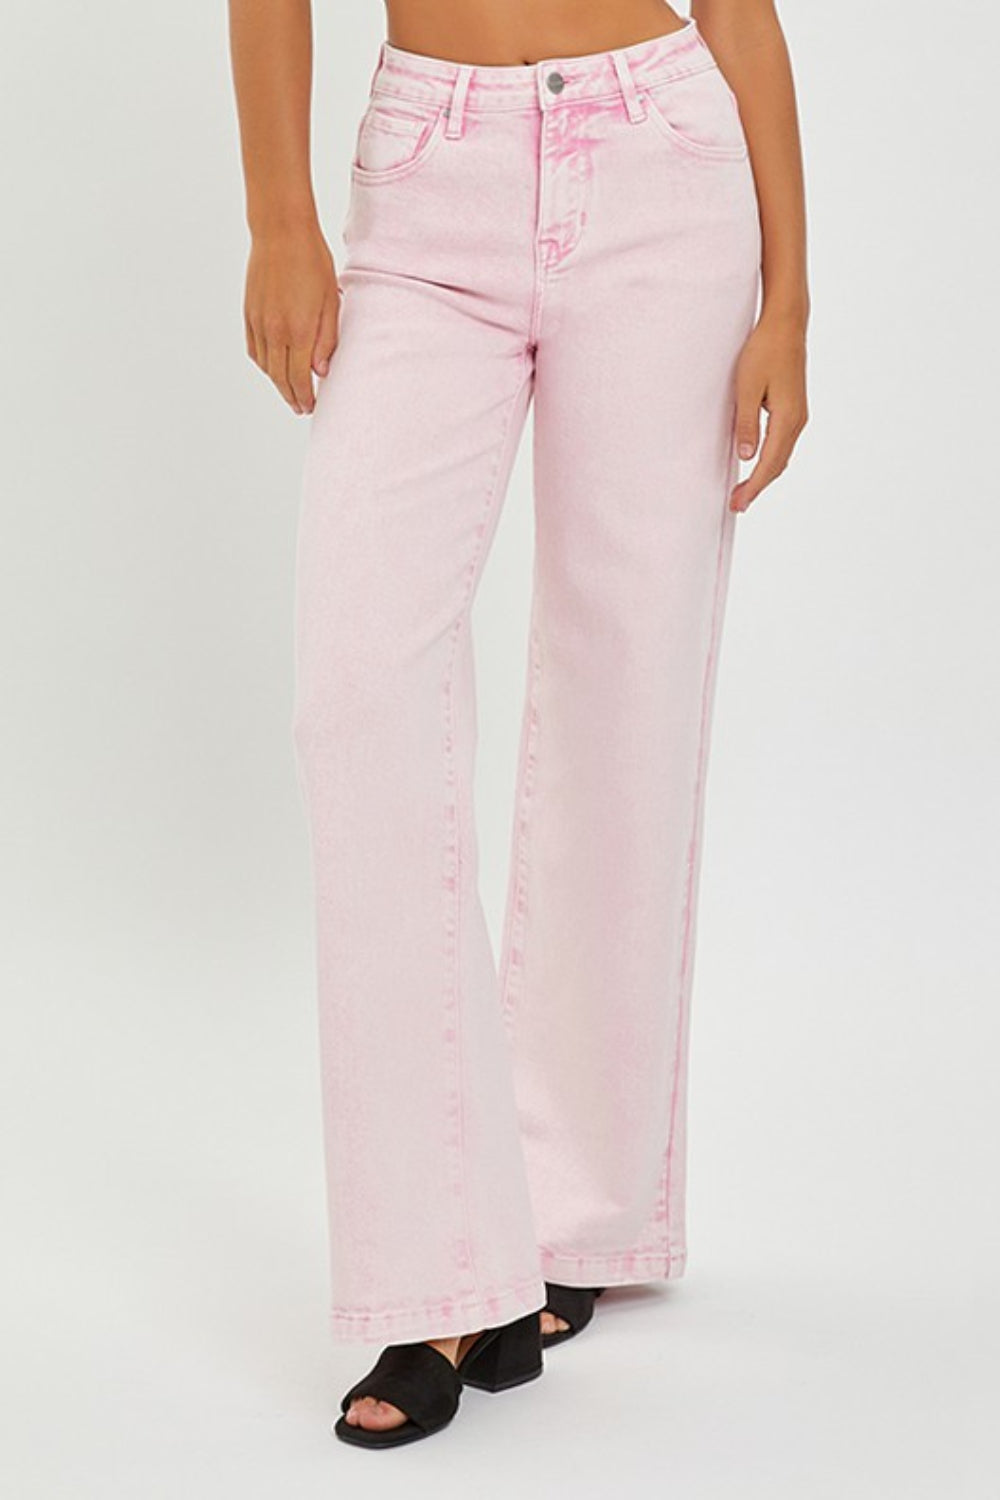 Taryn Pink Wide Leg Jeans - Cheeky Chic Boutique